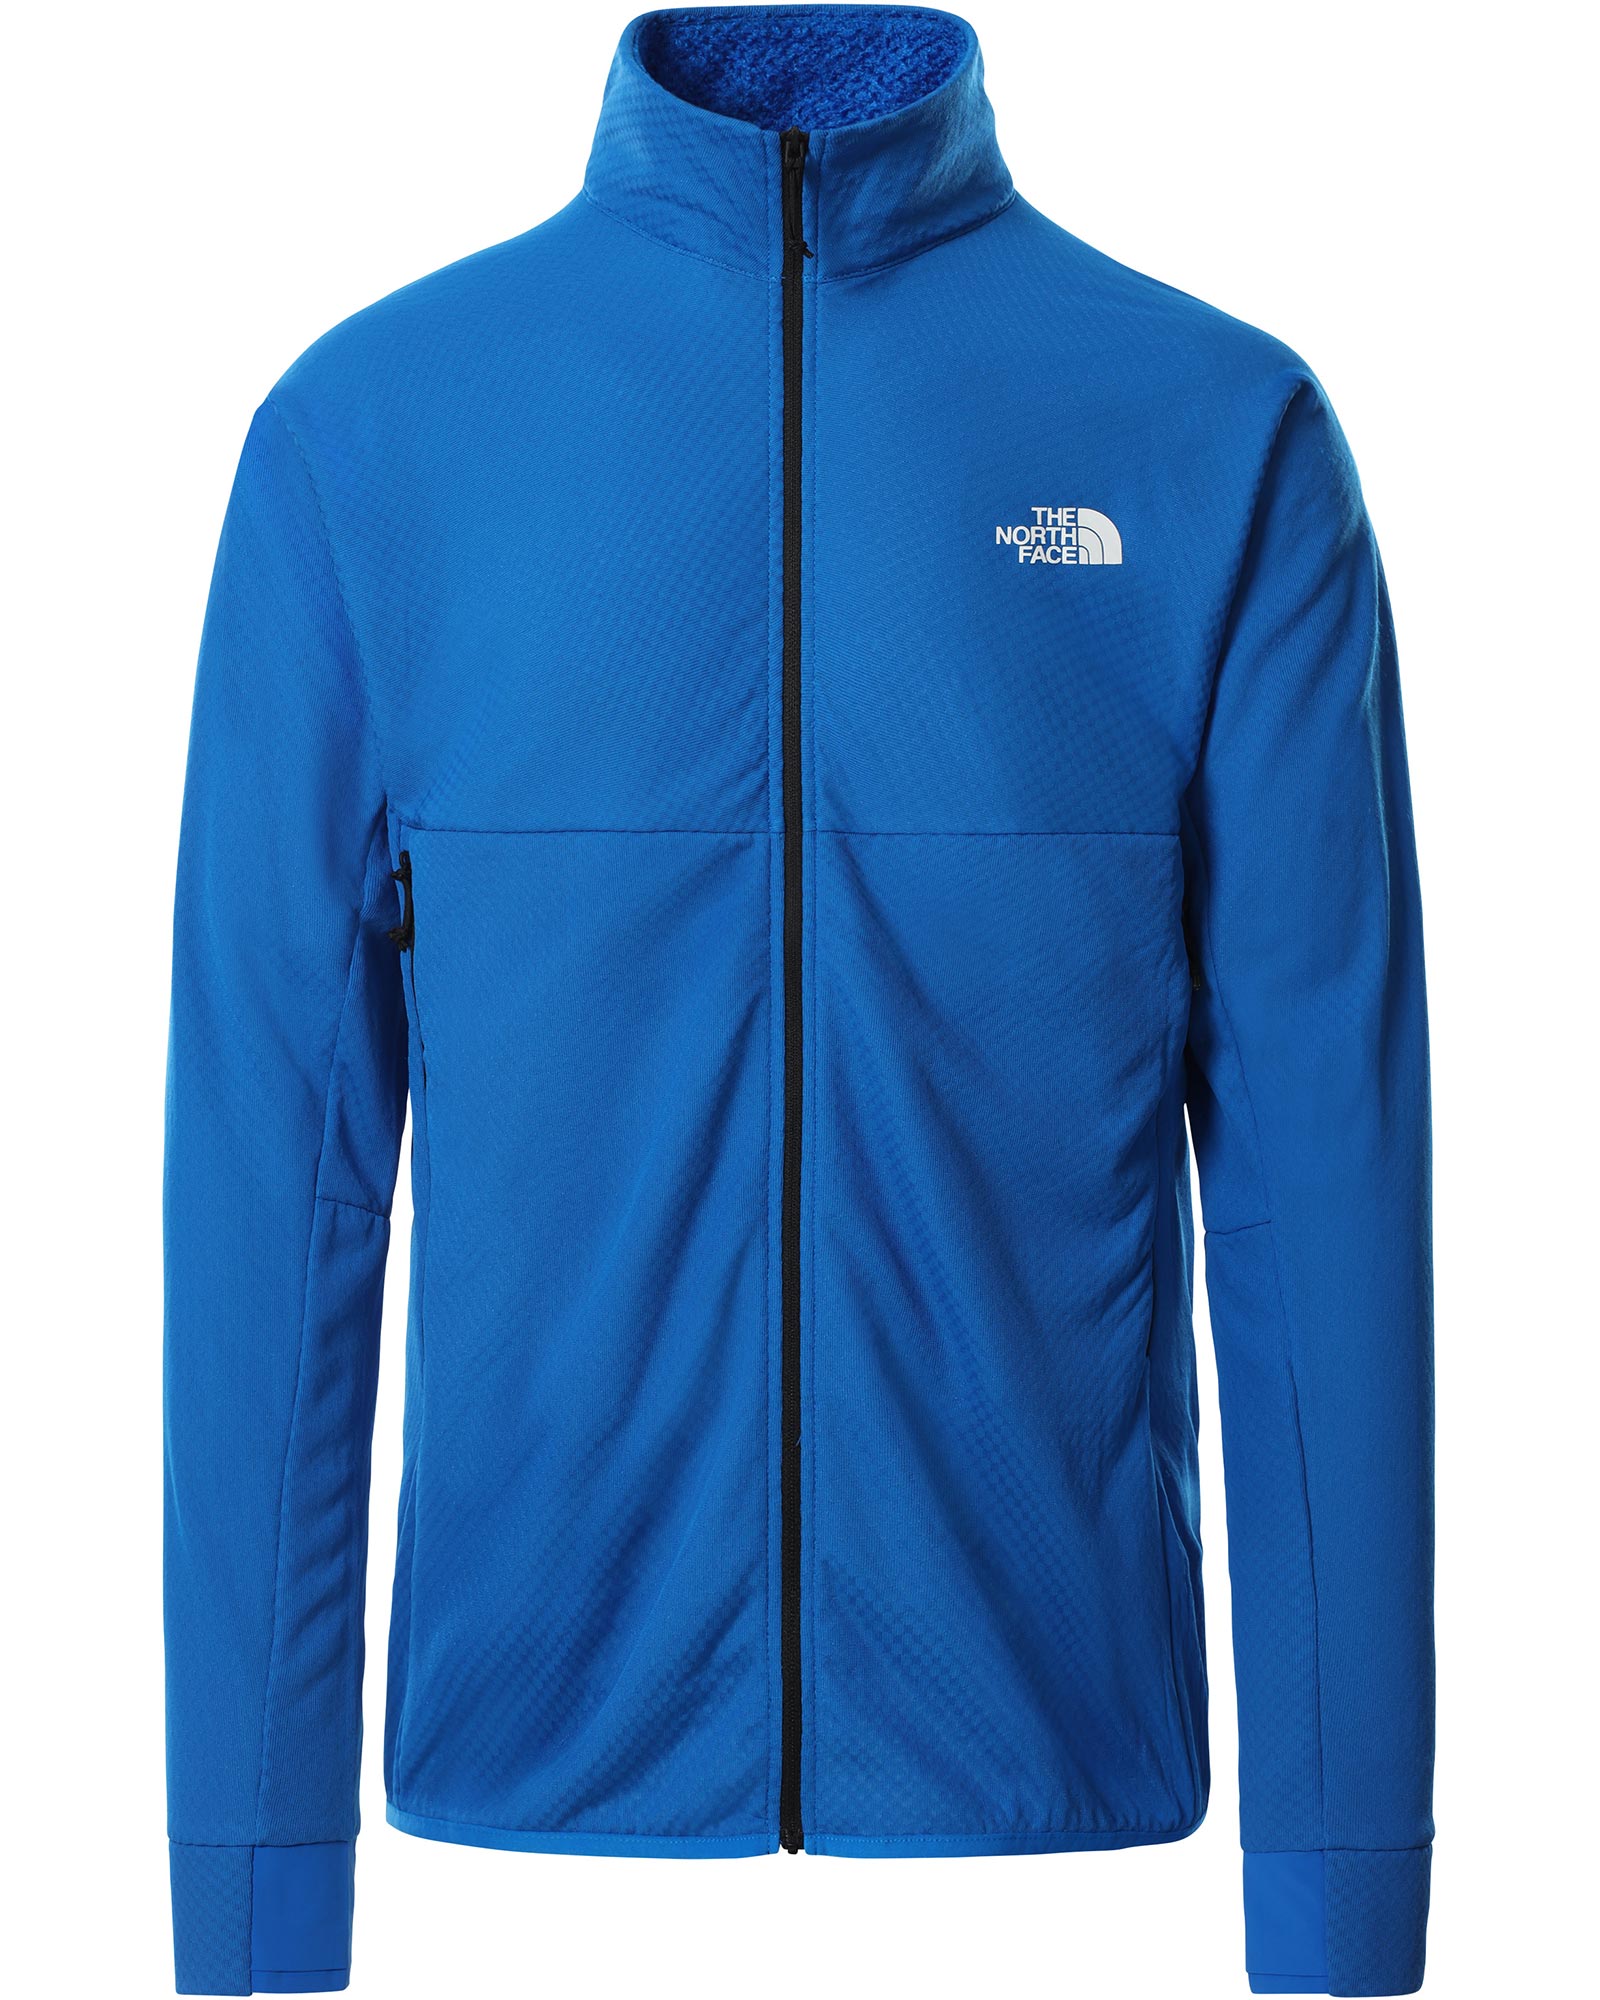 The North Face Summit L2 Men's Jacket 0